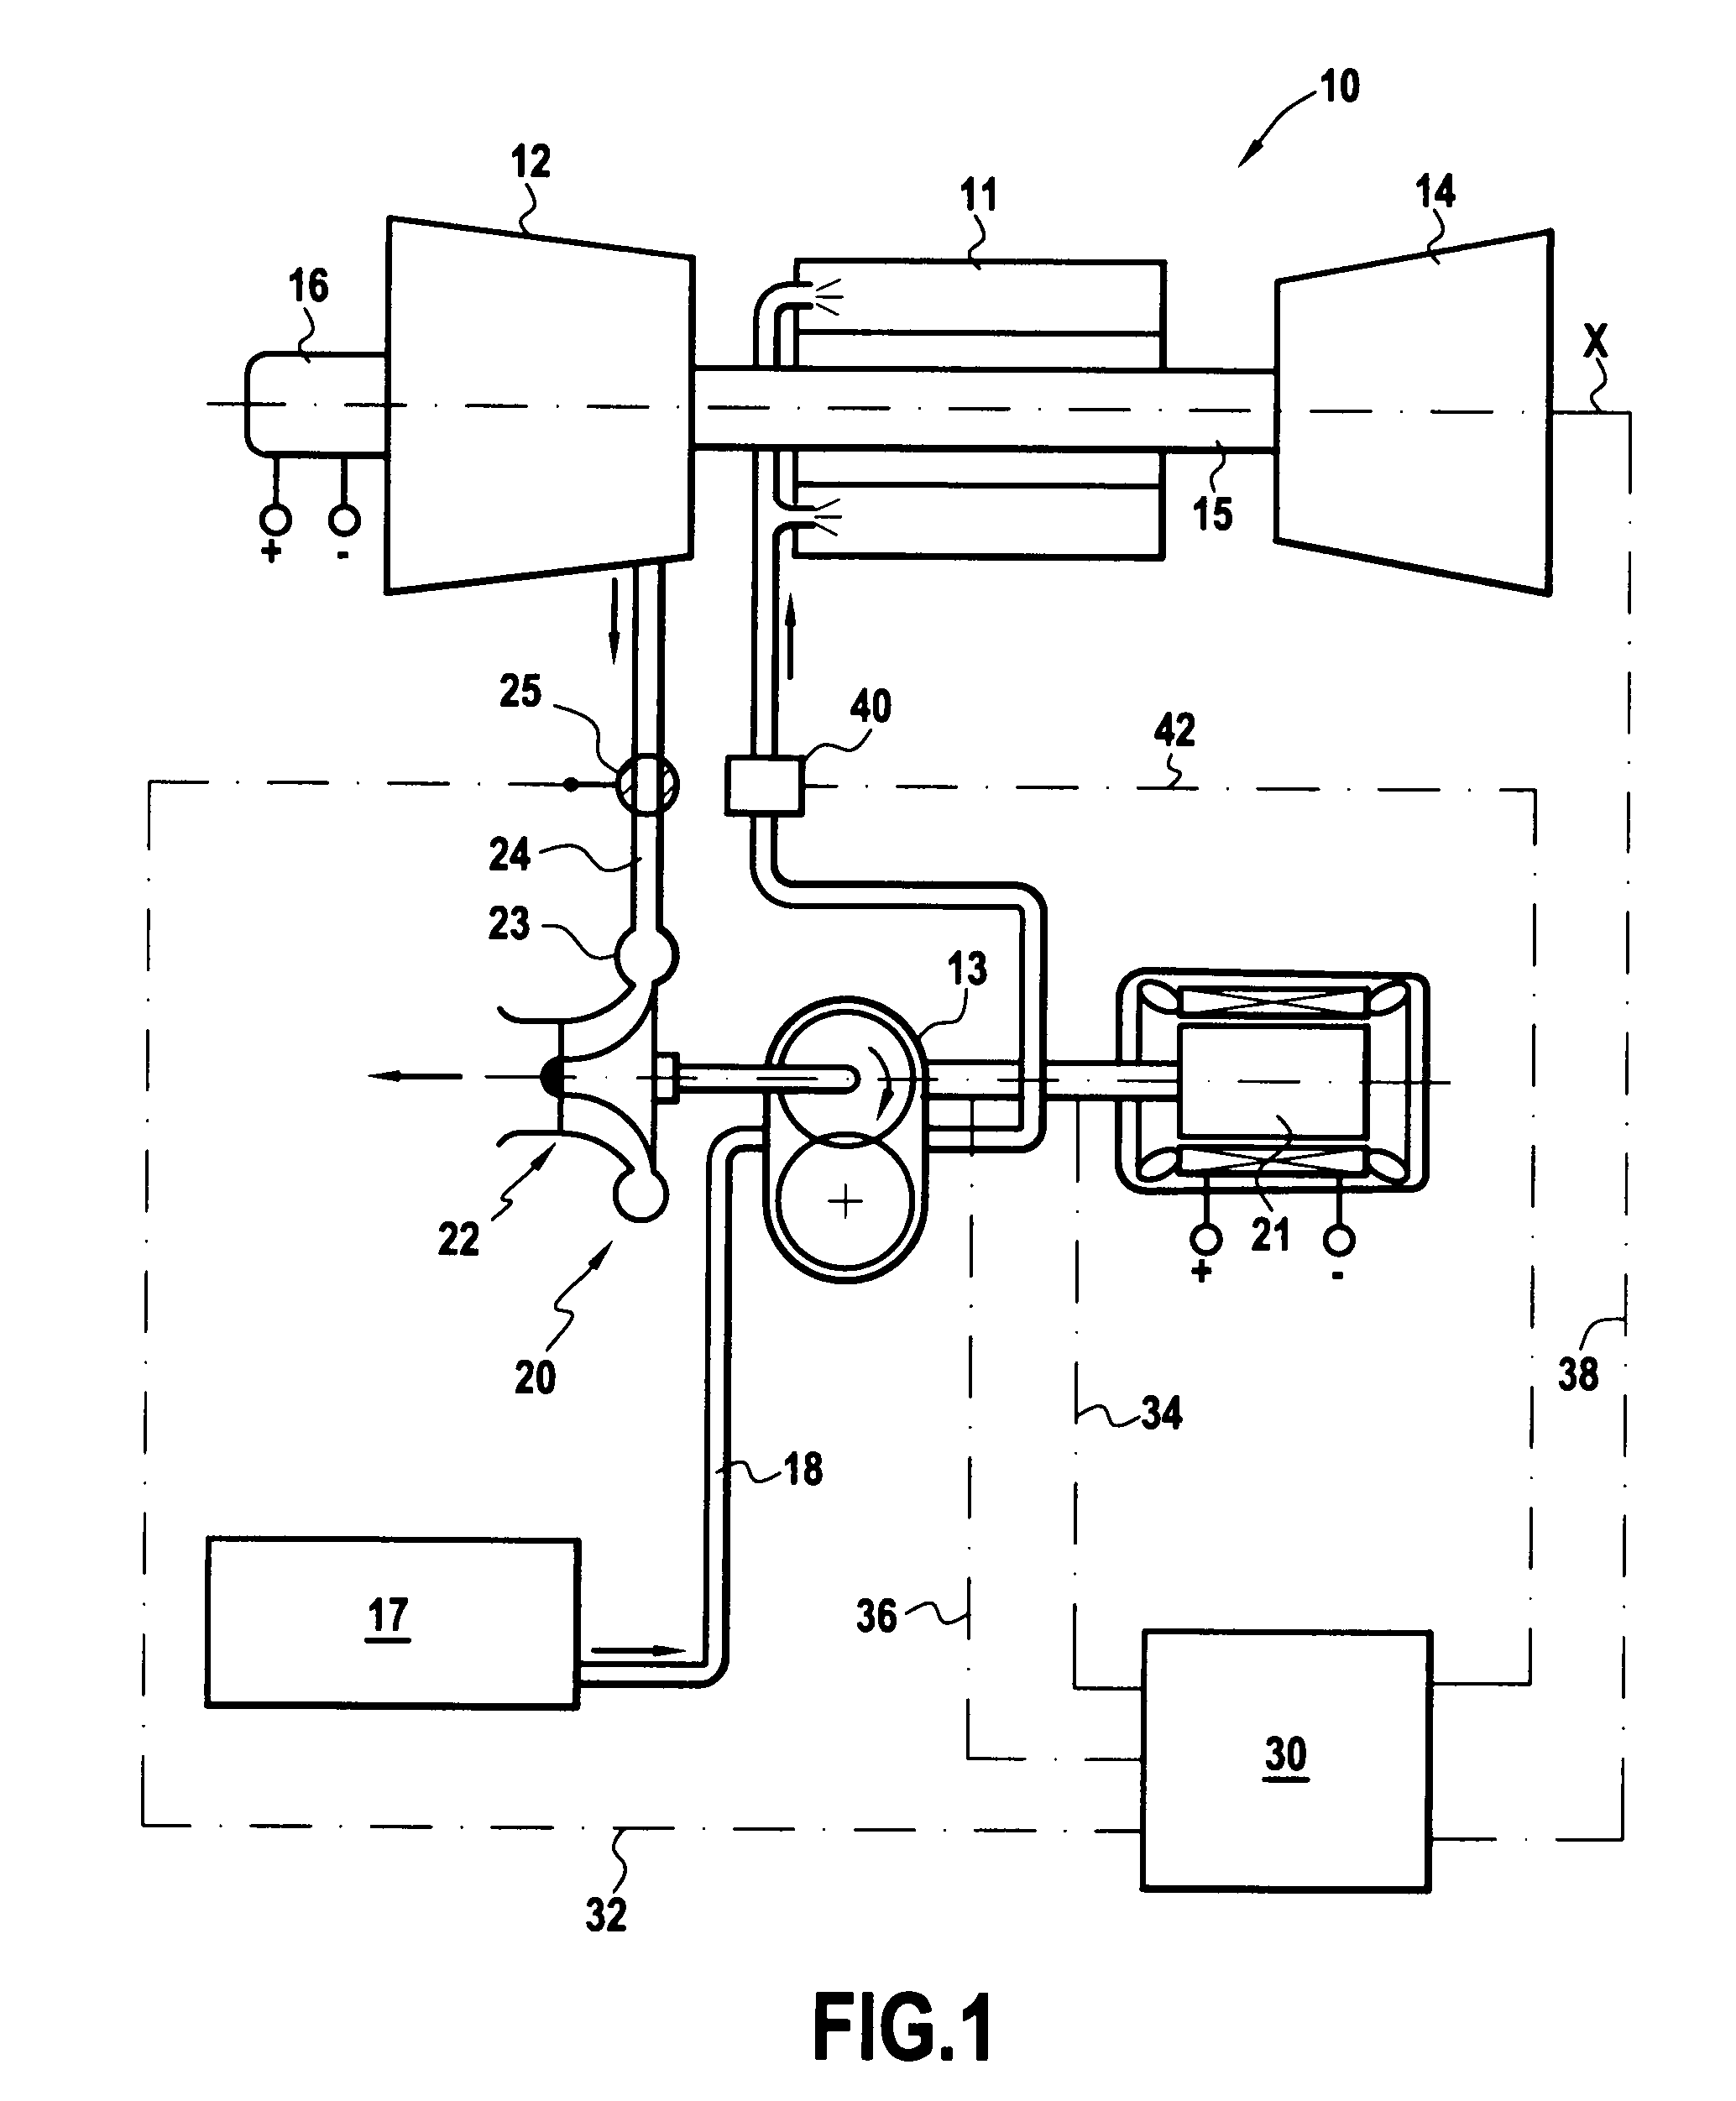 Assistance and emergency backup for the electrical drive of a fuel pump in a turbine engine